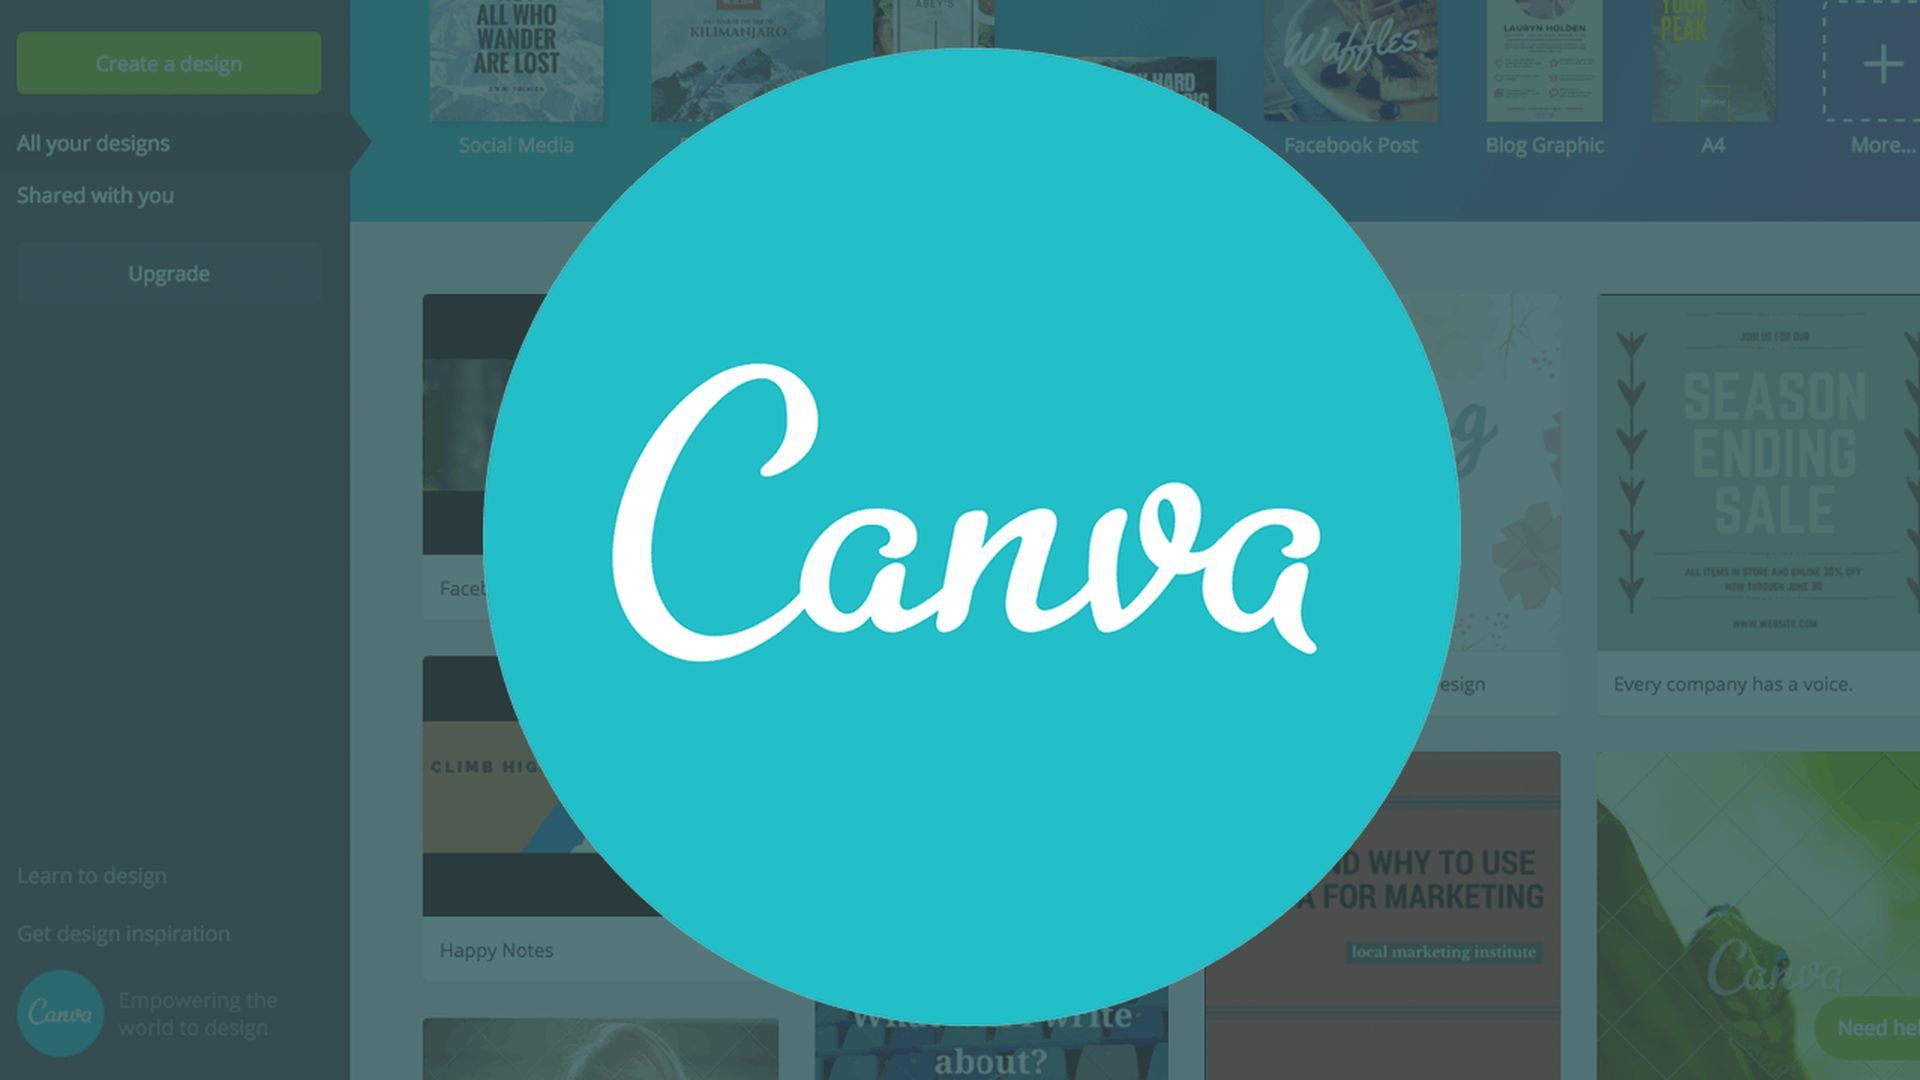 How to use Canva Beat Sync?